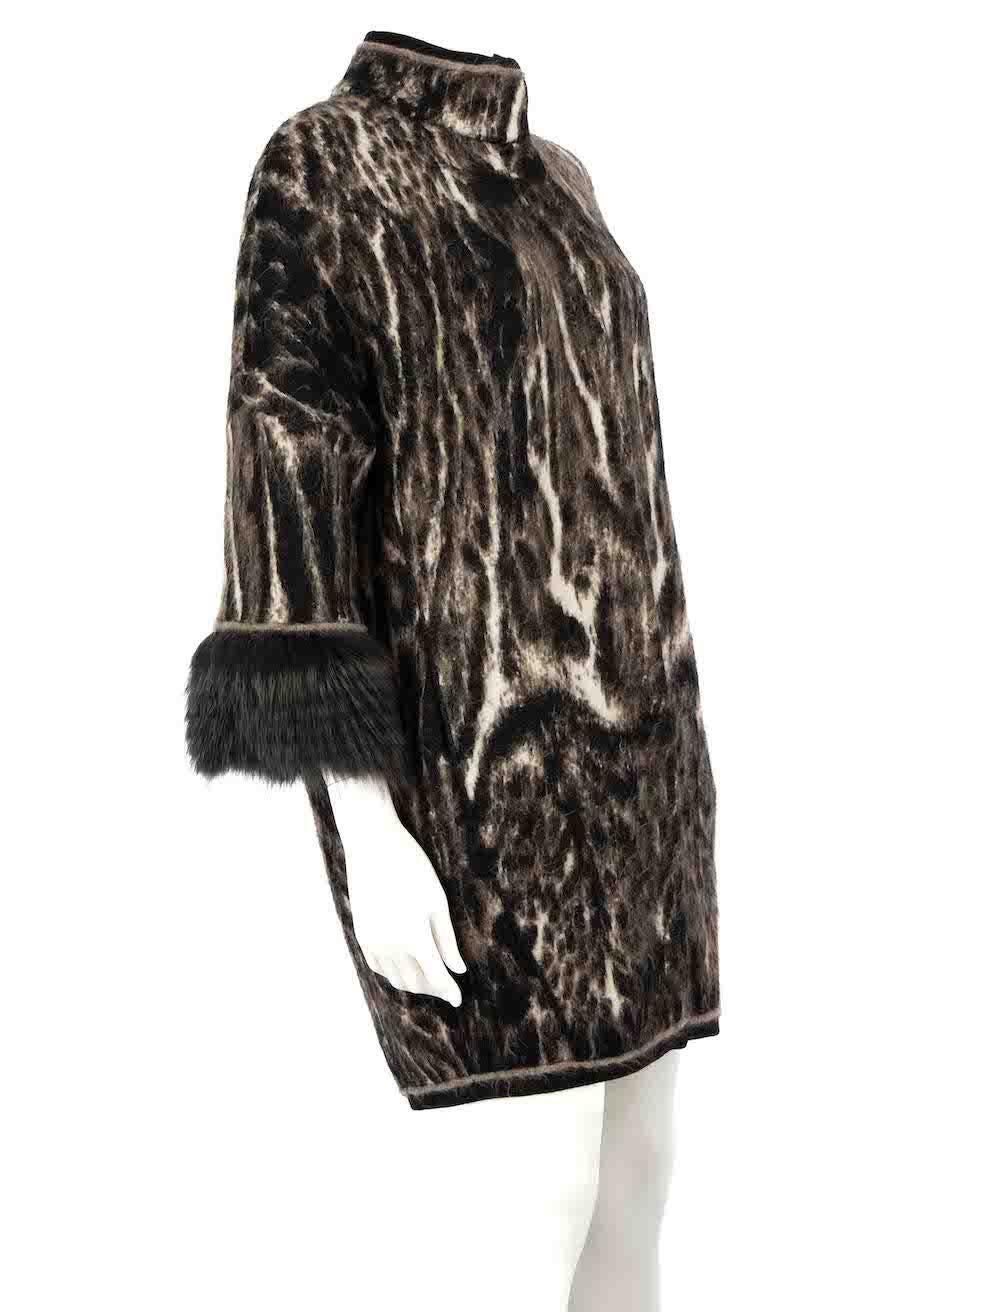 CONDITION is Very good. Hardly any visible wear to coat is evident on this used Roberto Cavalli designer resale item.
 
Details
Black
Wool
Mid length coat
Abstract pattern
Brushed texture
Front snap button closure
Fur trim cuffs
2x Front side